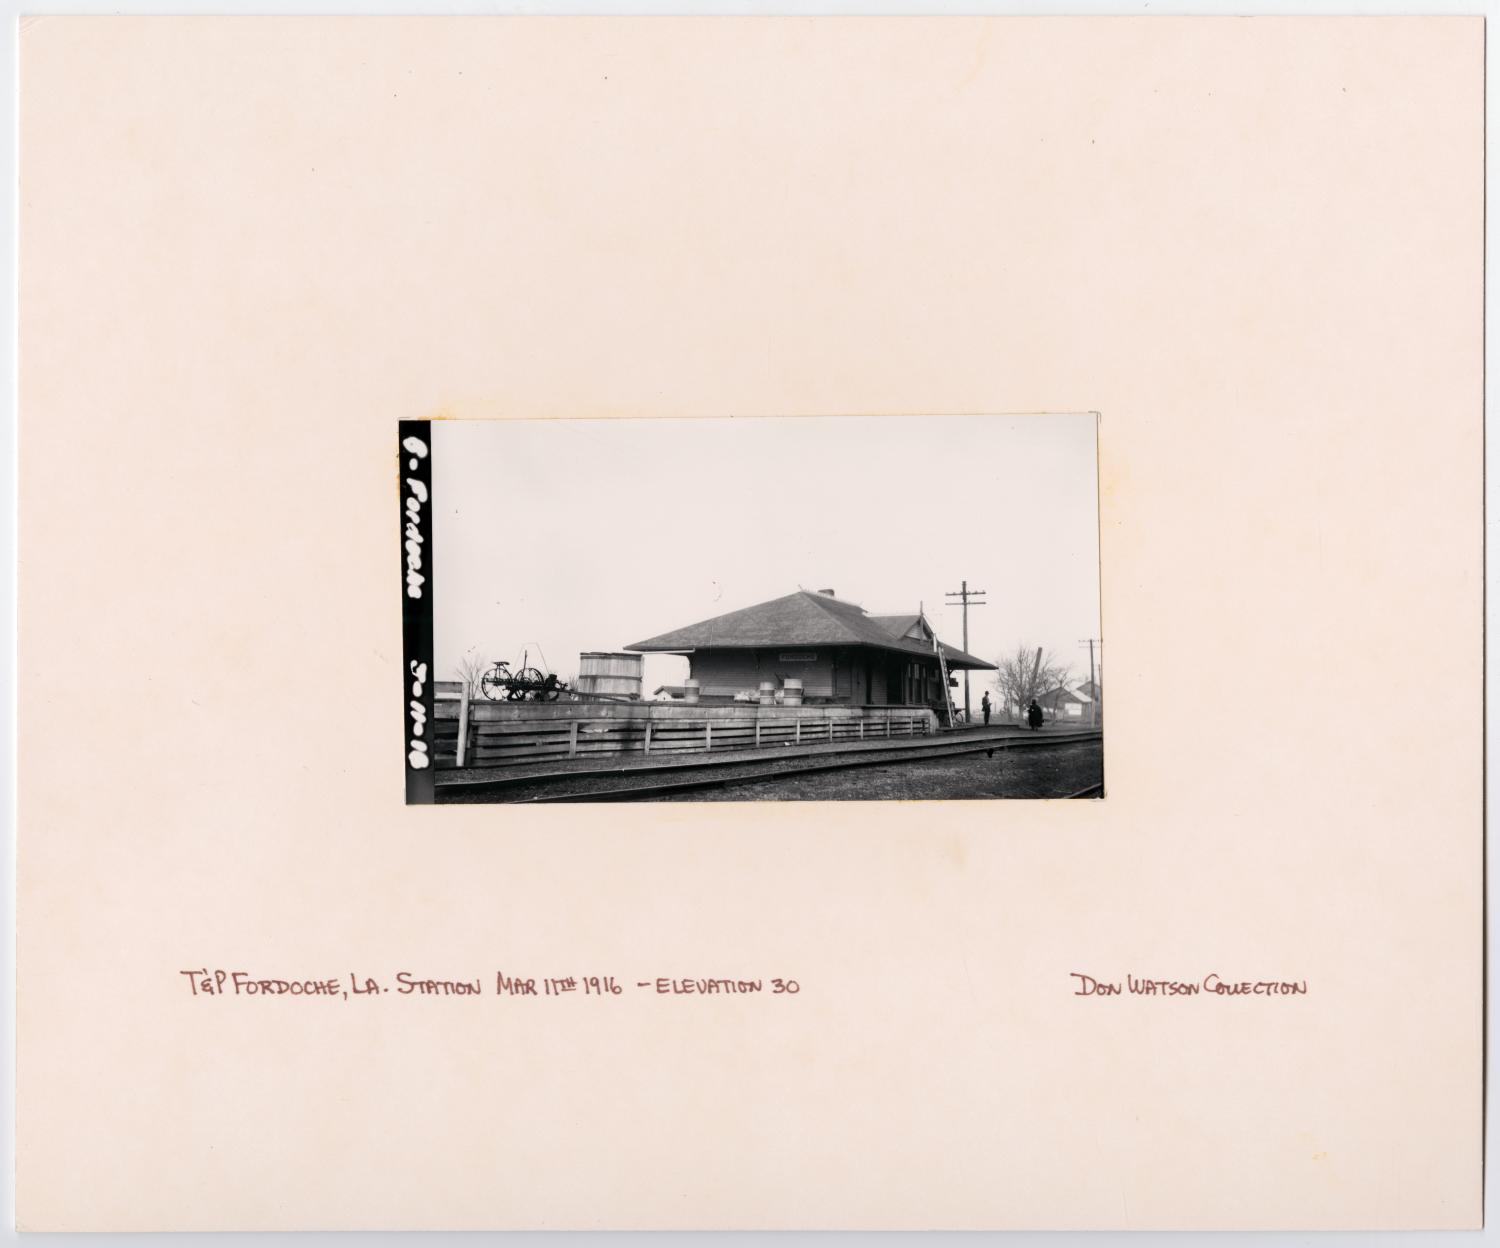 Images of Texas & Pacific Stations and Structures in Fordoche, LA